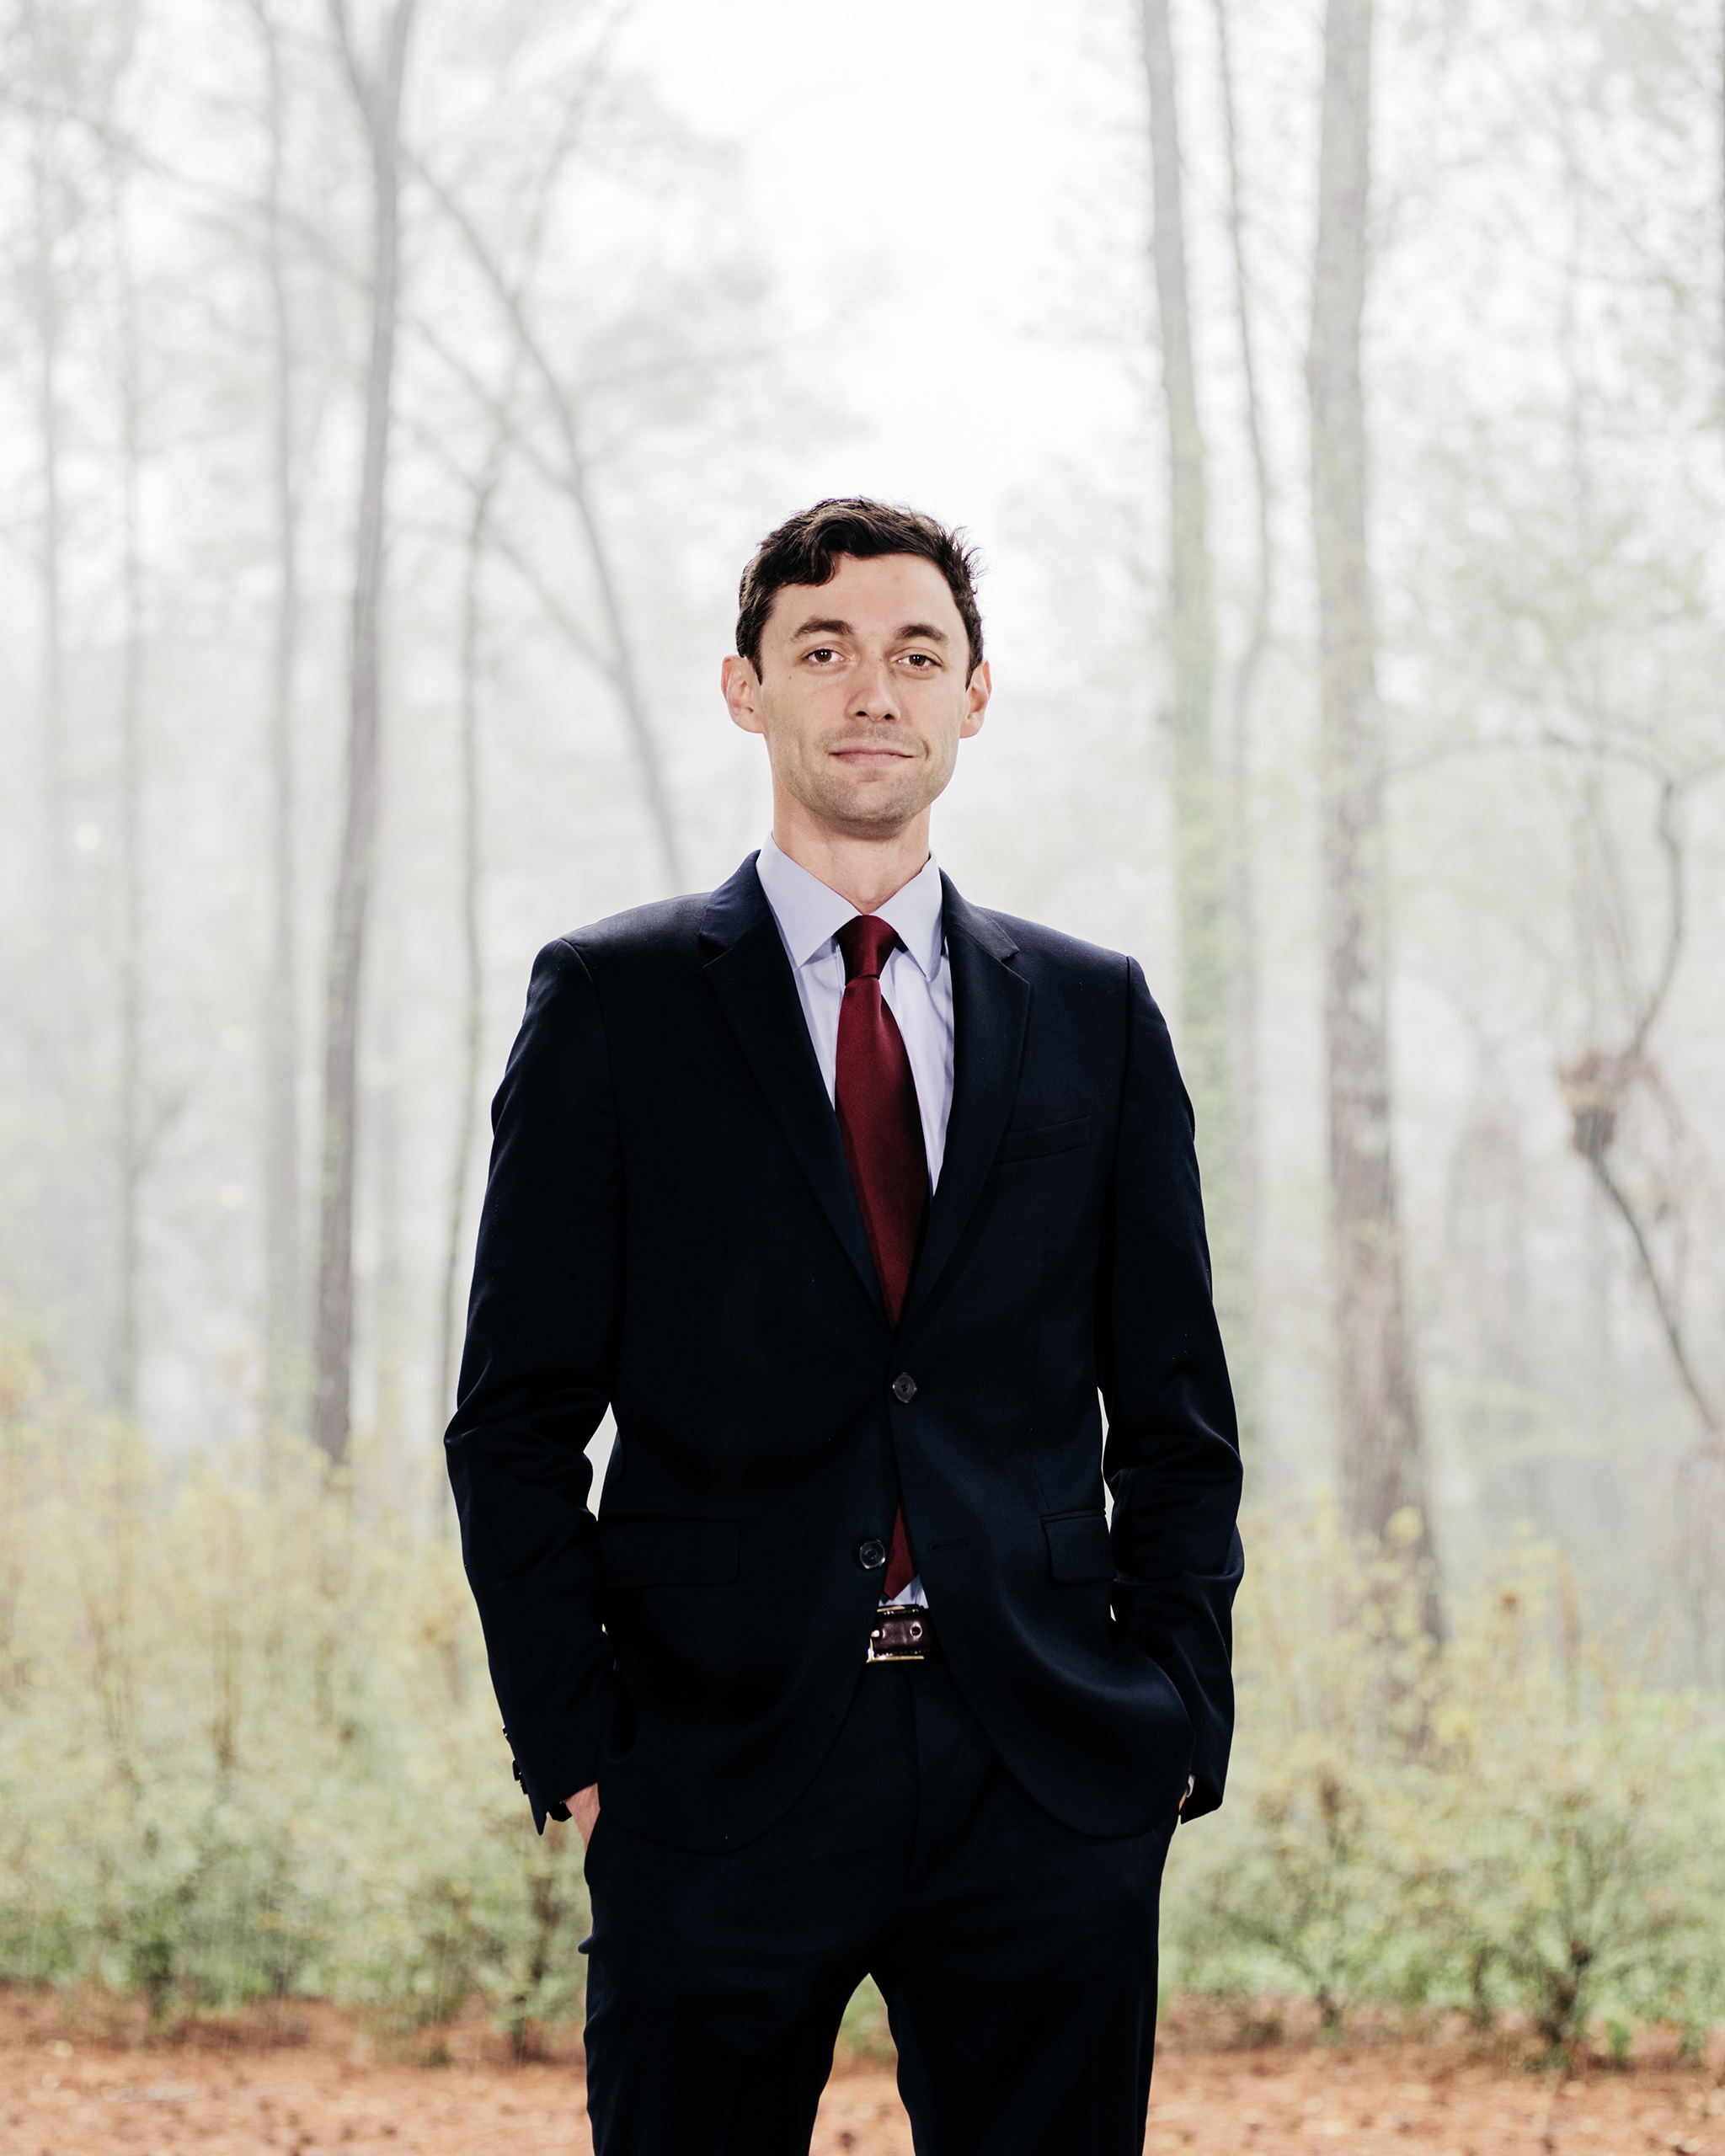 Jon Ossoff, 30. Candidate in Georgia’s 6th Congressional District •Atlanta native with degrees from Georgetown University and the London School of Economics •A former congressional aide, he became CEO of a company that makes documentaries about global issues •Announced his campaign in January with the endorsement of Democratic Representative John Lewis